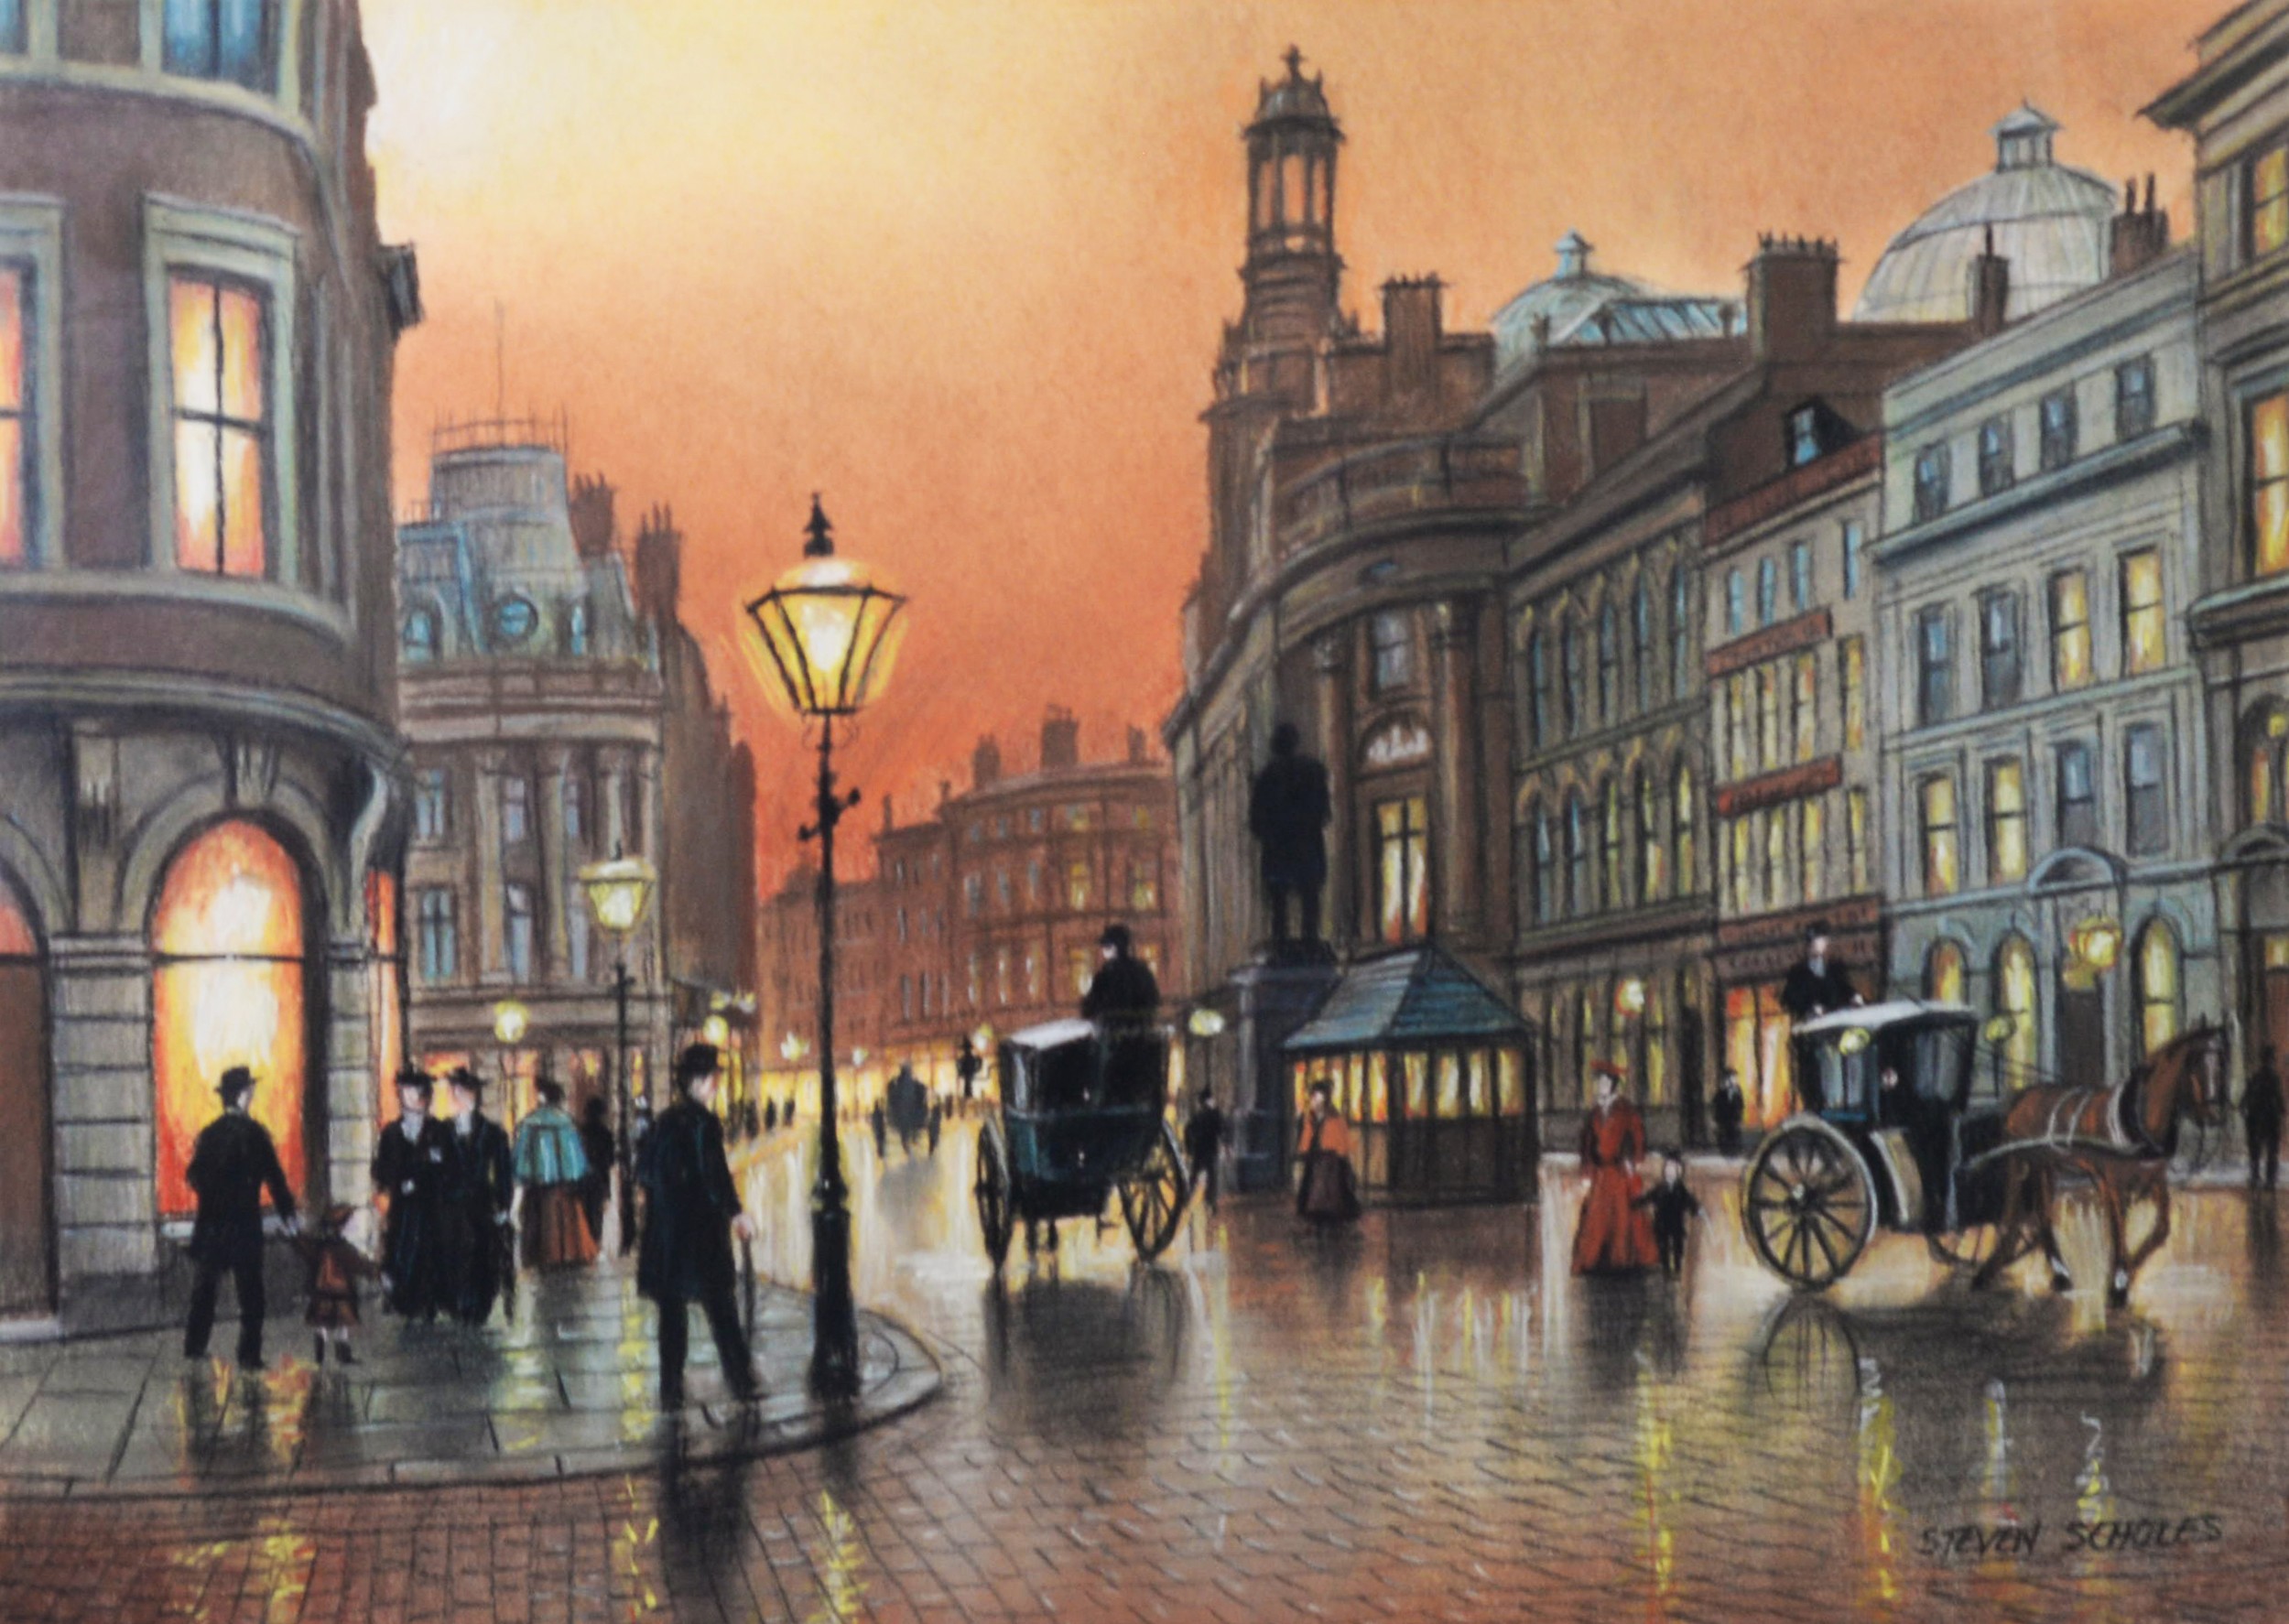 STEVEN SCHOLES PASTEL DRAWING Cross Street & the Royal Exchange Building, Manchester with hansom